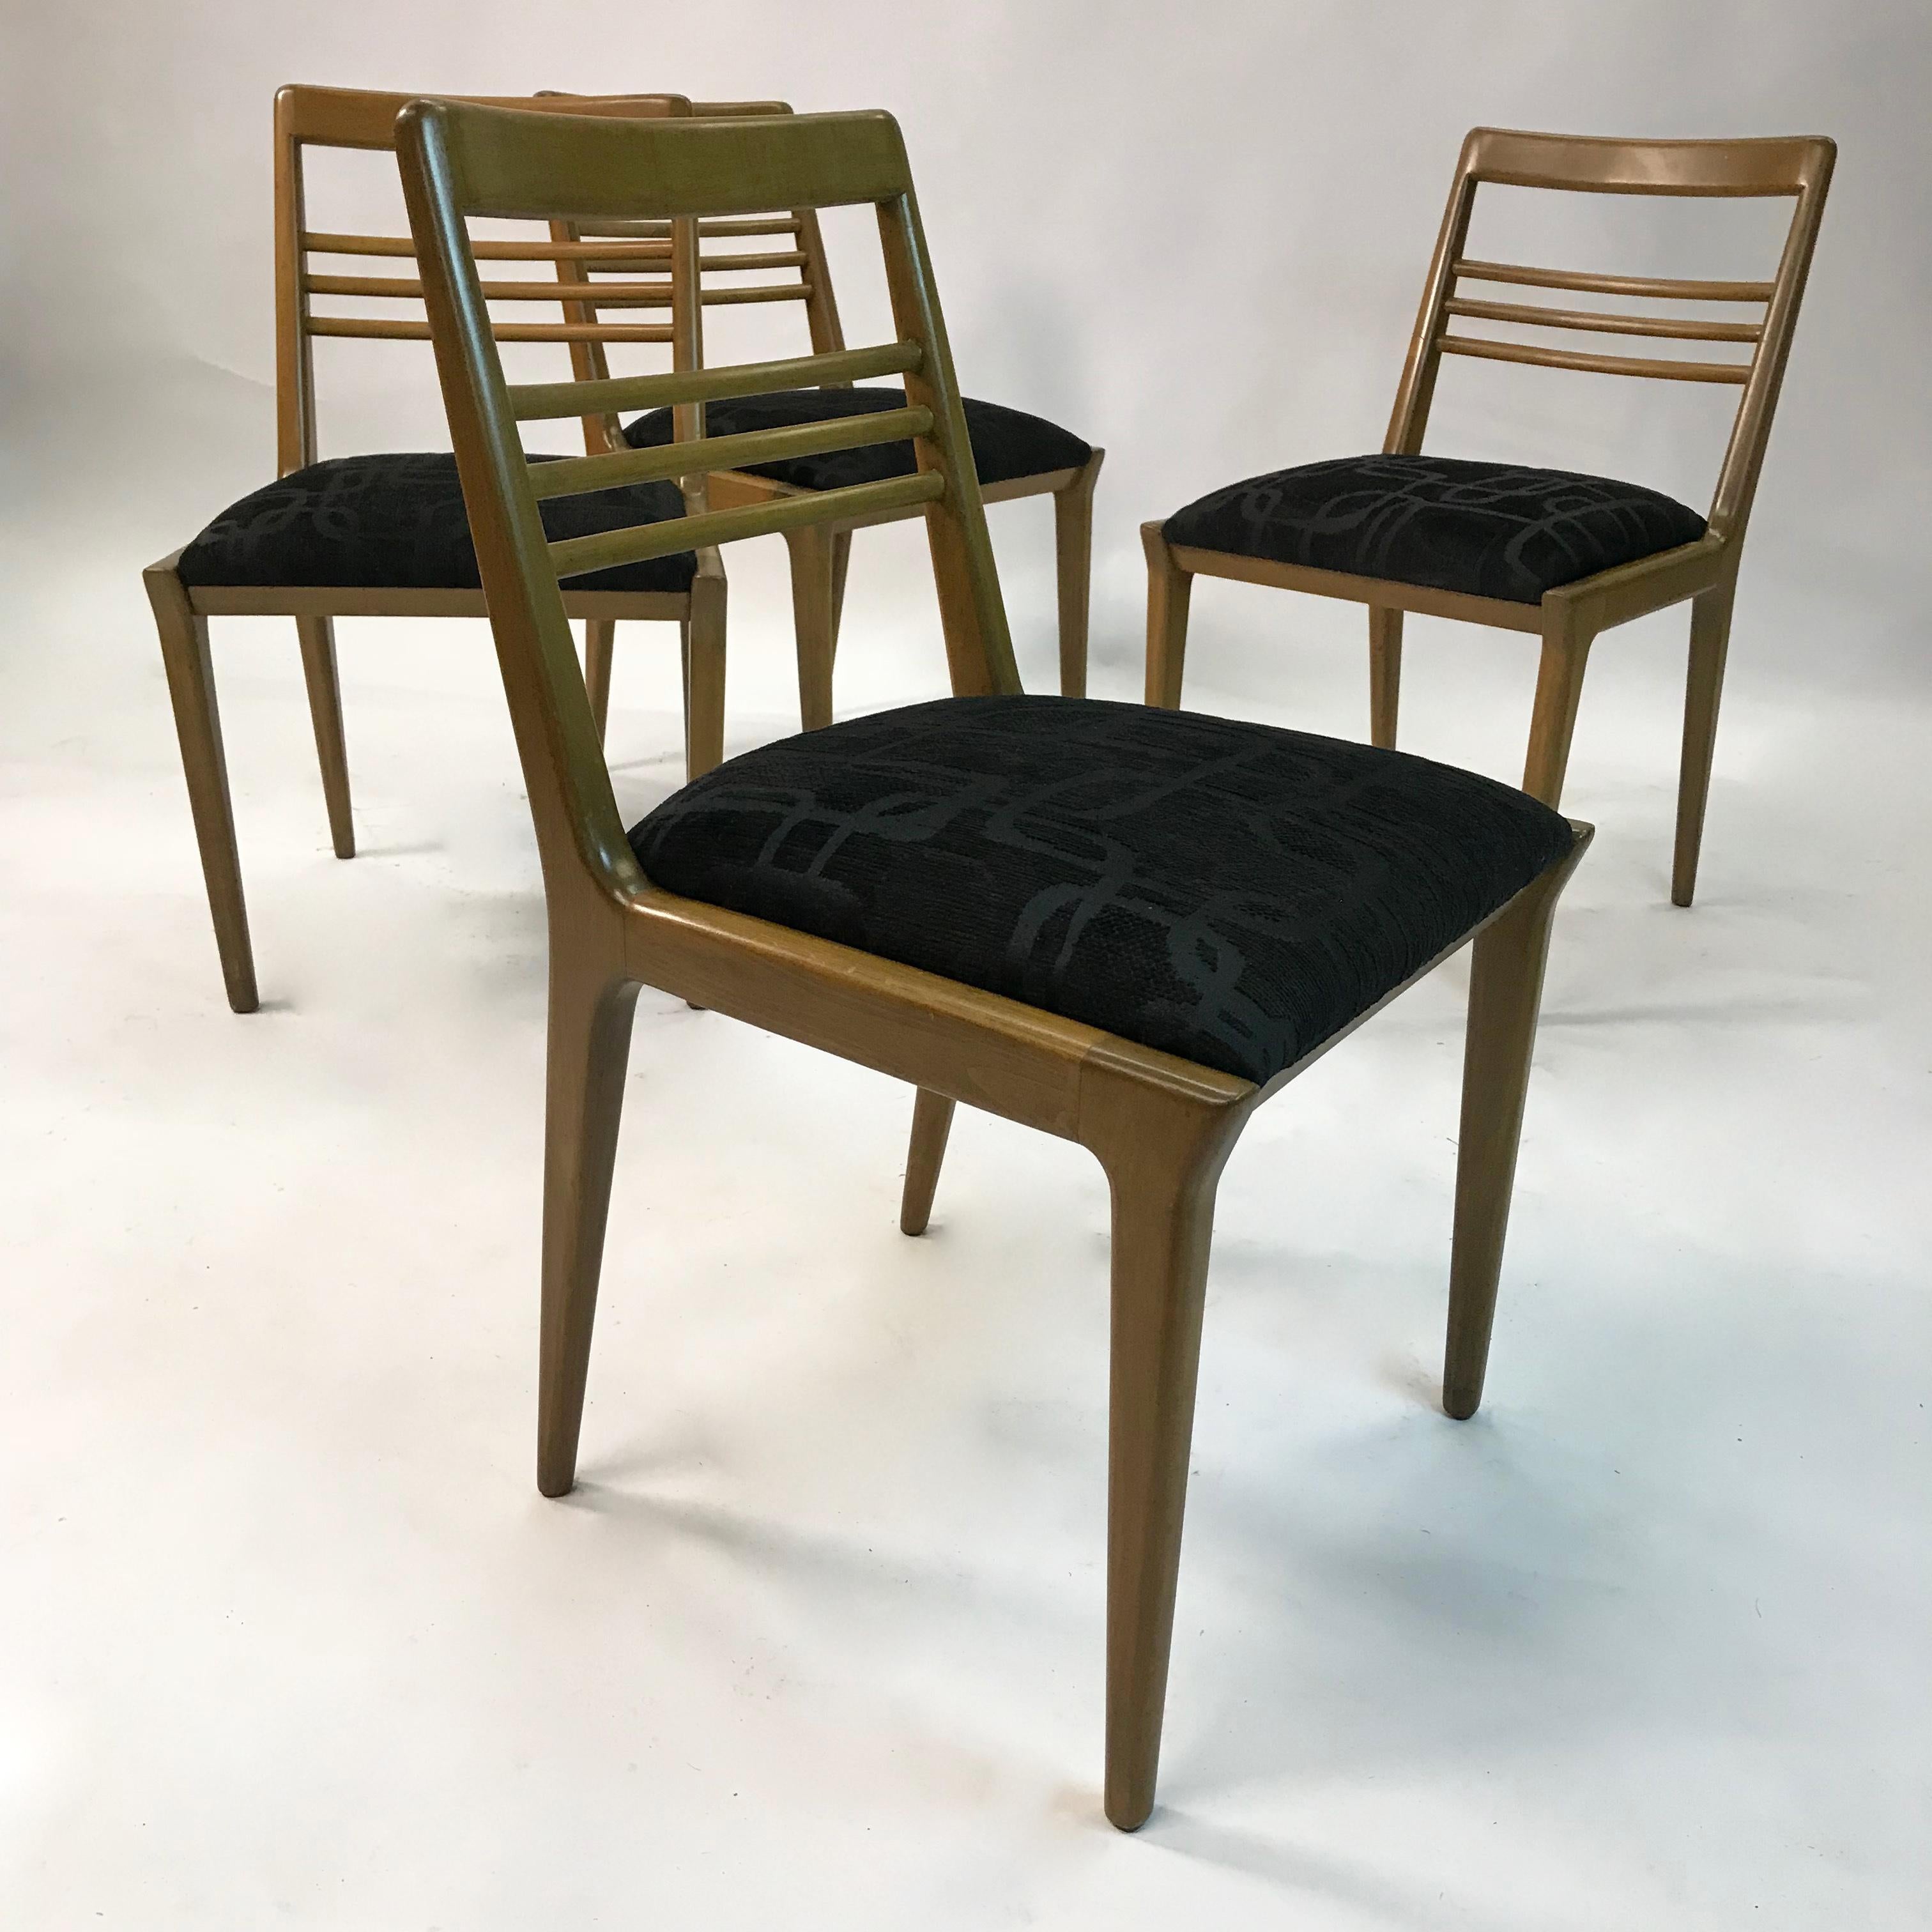 Set of 4, Mid-Century Modern, dining chairs by Kipp Stewart for Drexel feature walnut frames with newly upholstered seats in black jacquard.